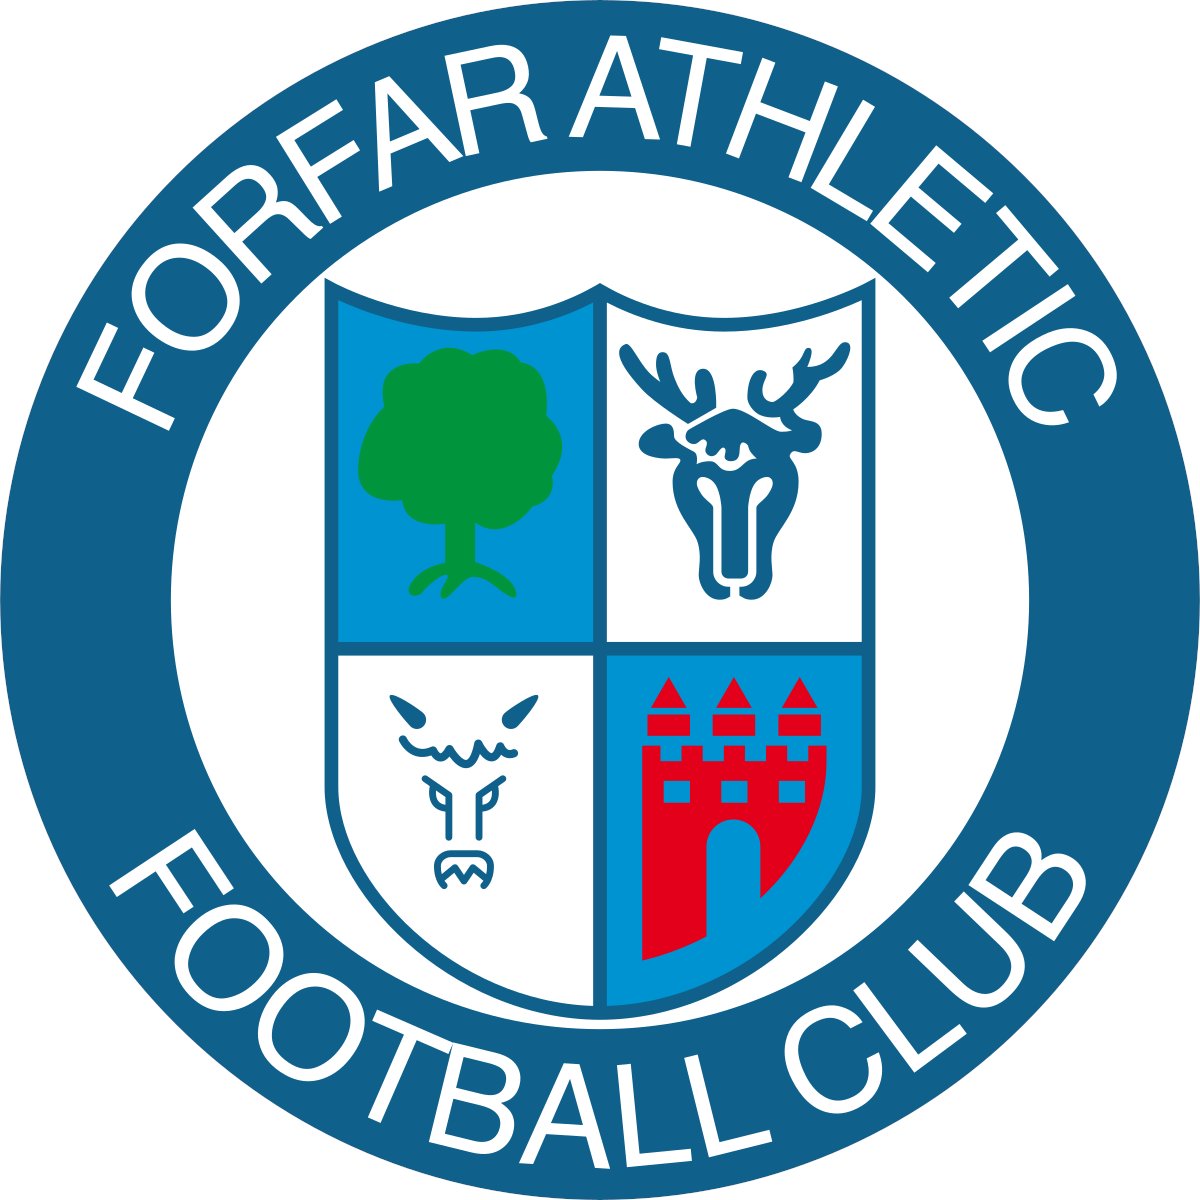 How Forfar Athletic's season never got on track after pre-season derailing @Lee_Smith1992 joins @craigfowler86 to discuss Ray McKinnon's flirtation with another club, Stuart Morrison's class and Russell McLean being very much the same player as before. patreon.com/posts/10382145…